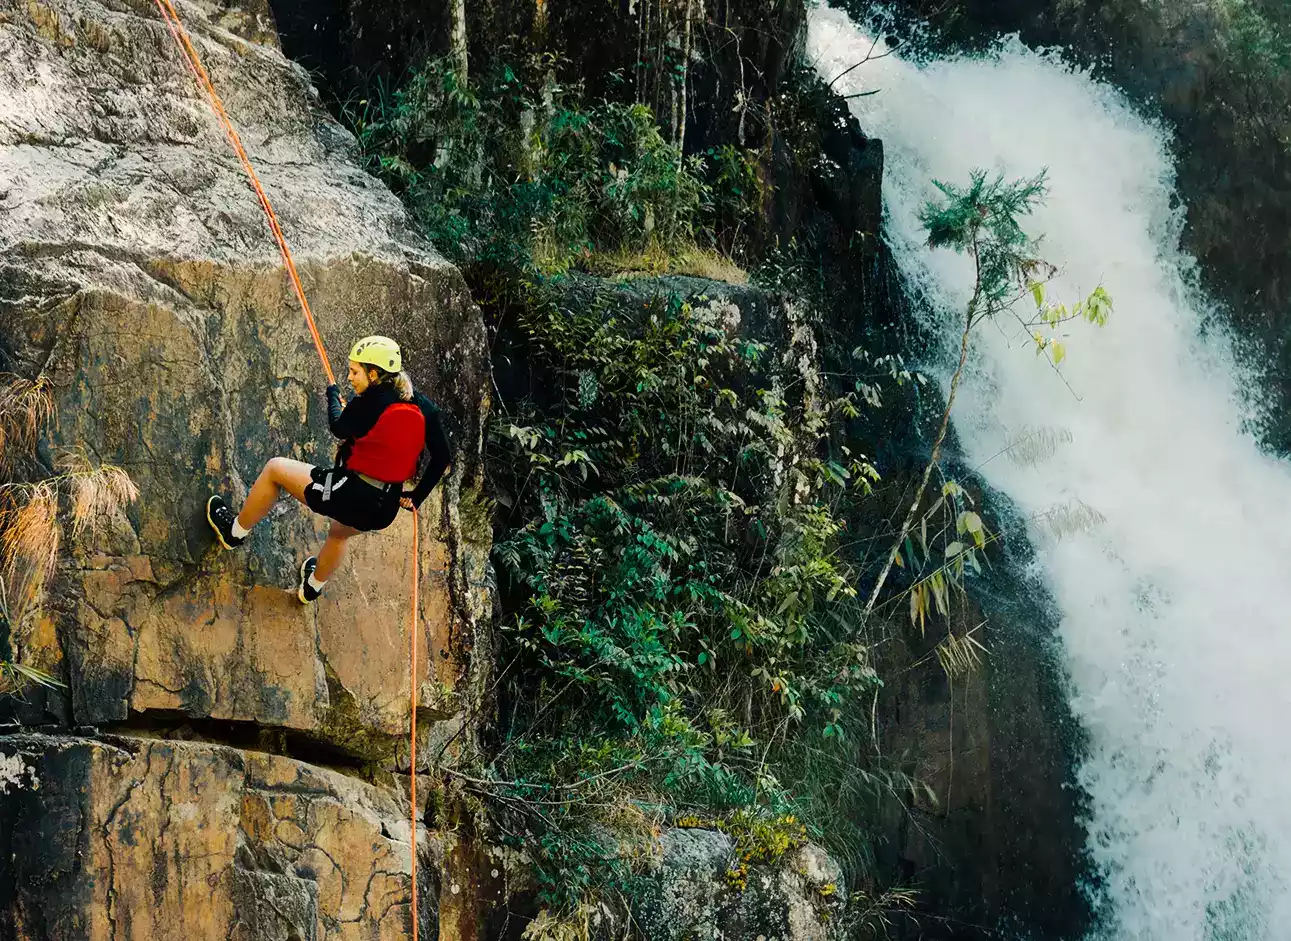 Rock Climbing and Rappelling - Thrilling adventures on cliffs and descents